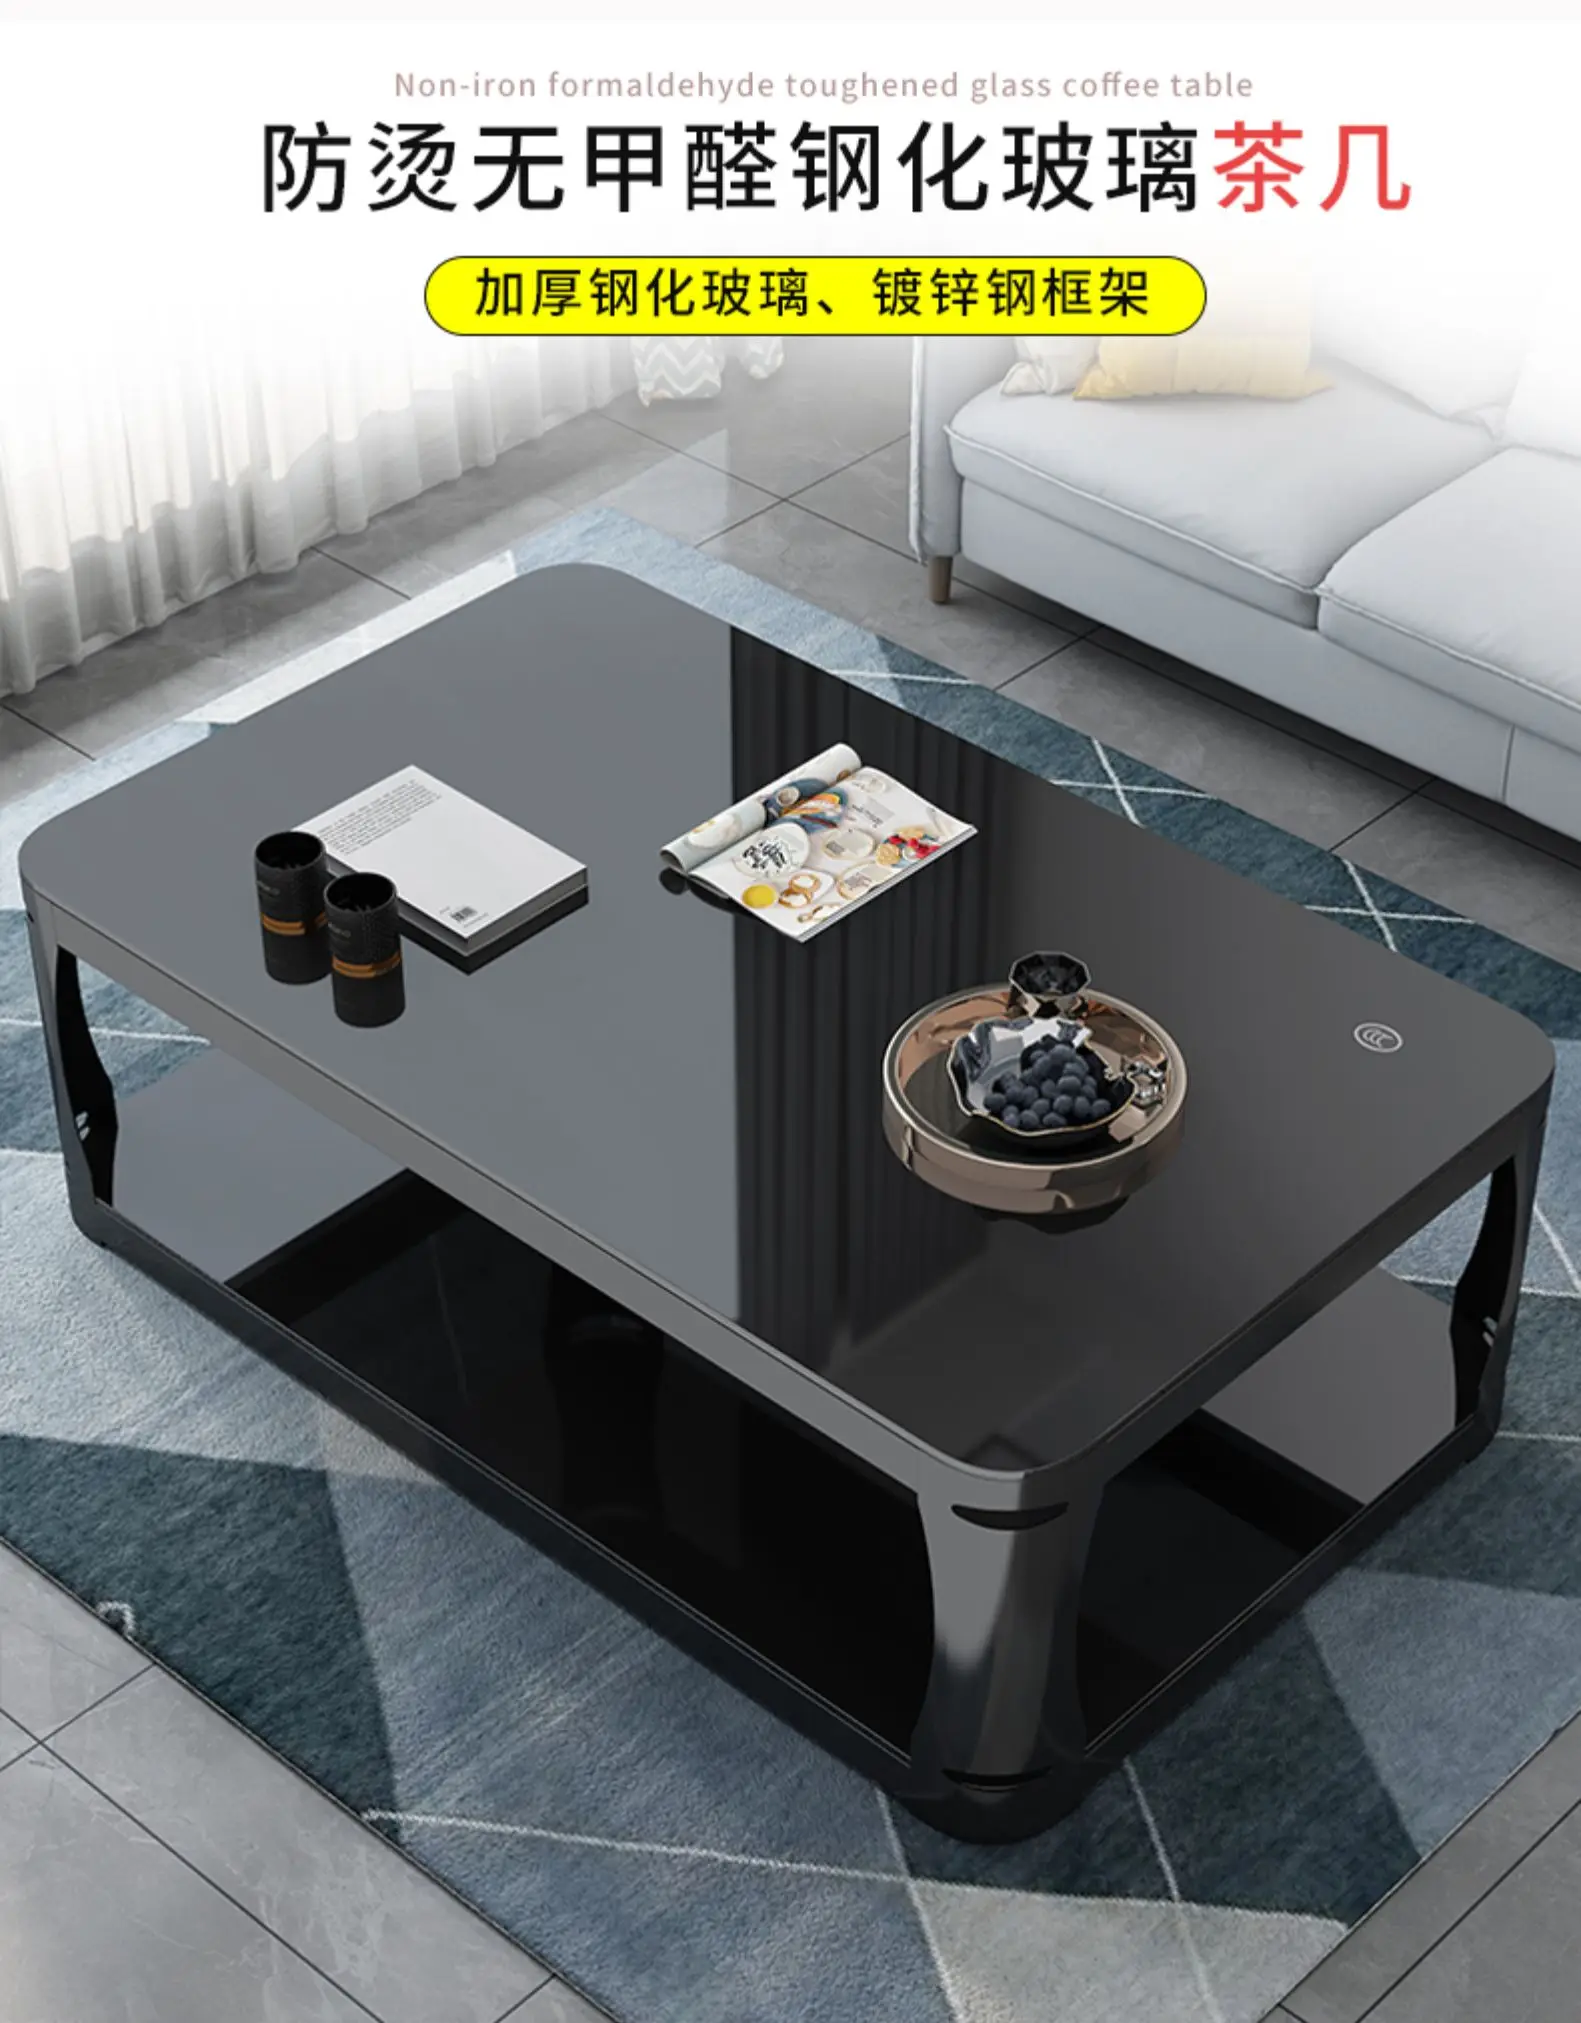 Glass tea table tempered glass small family office small table tea table  simple iron tea table living room household| | - AliExpress